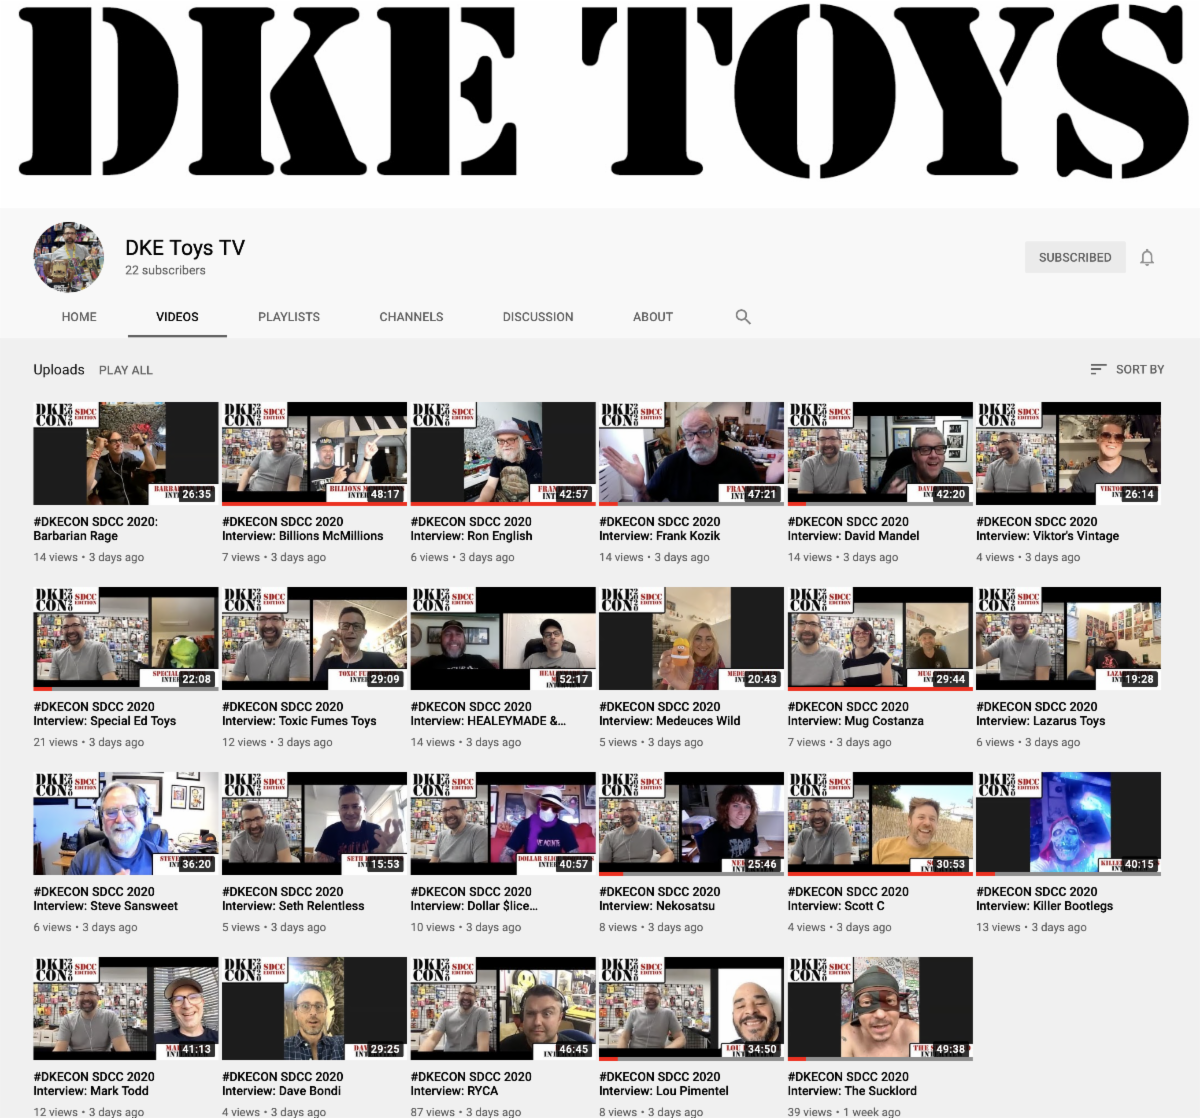 Check out the archived interviews on YouTube #DKEToysTV